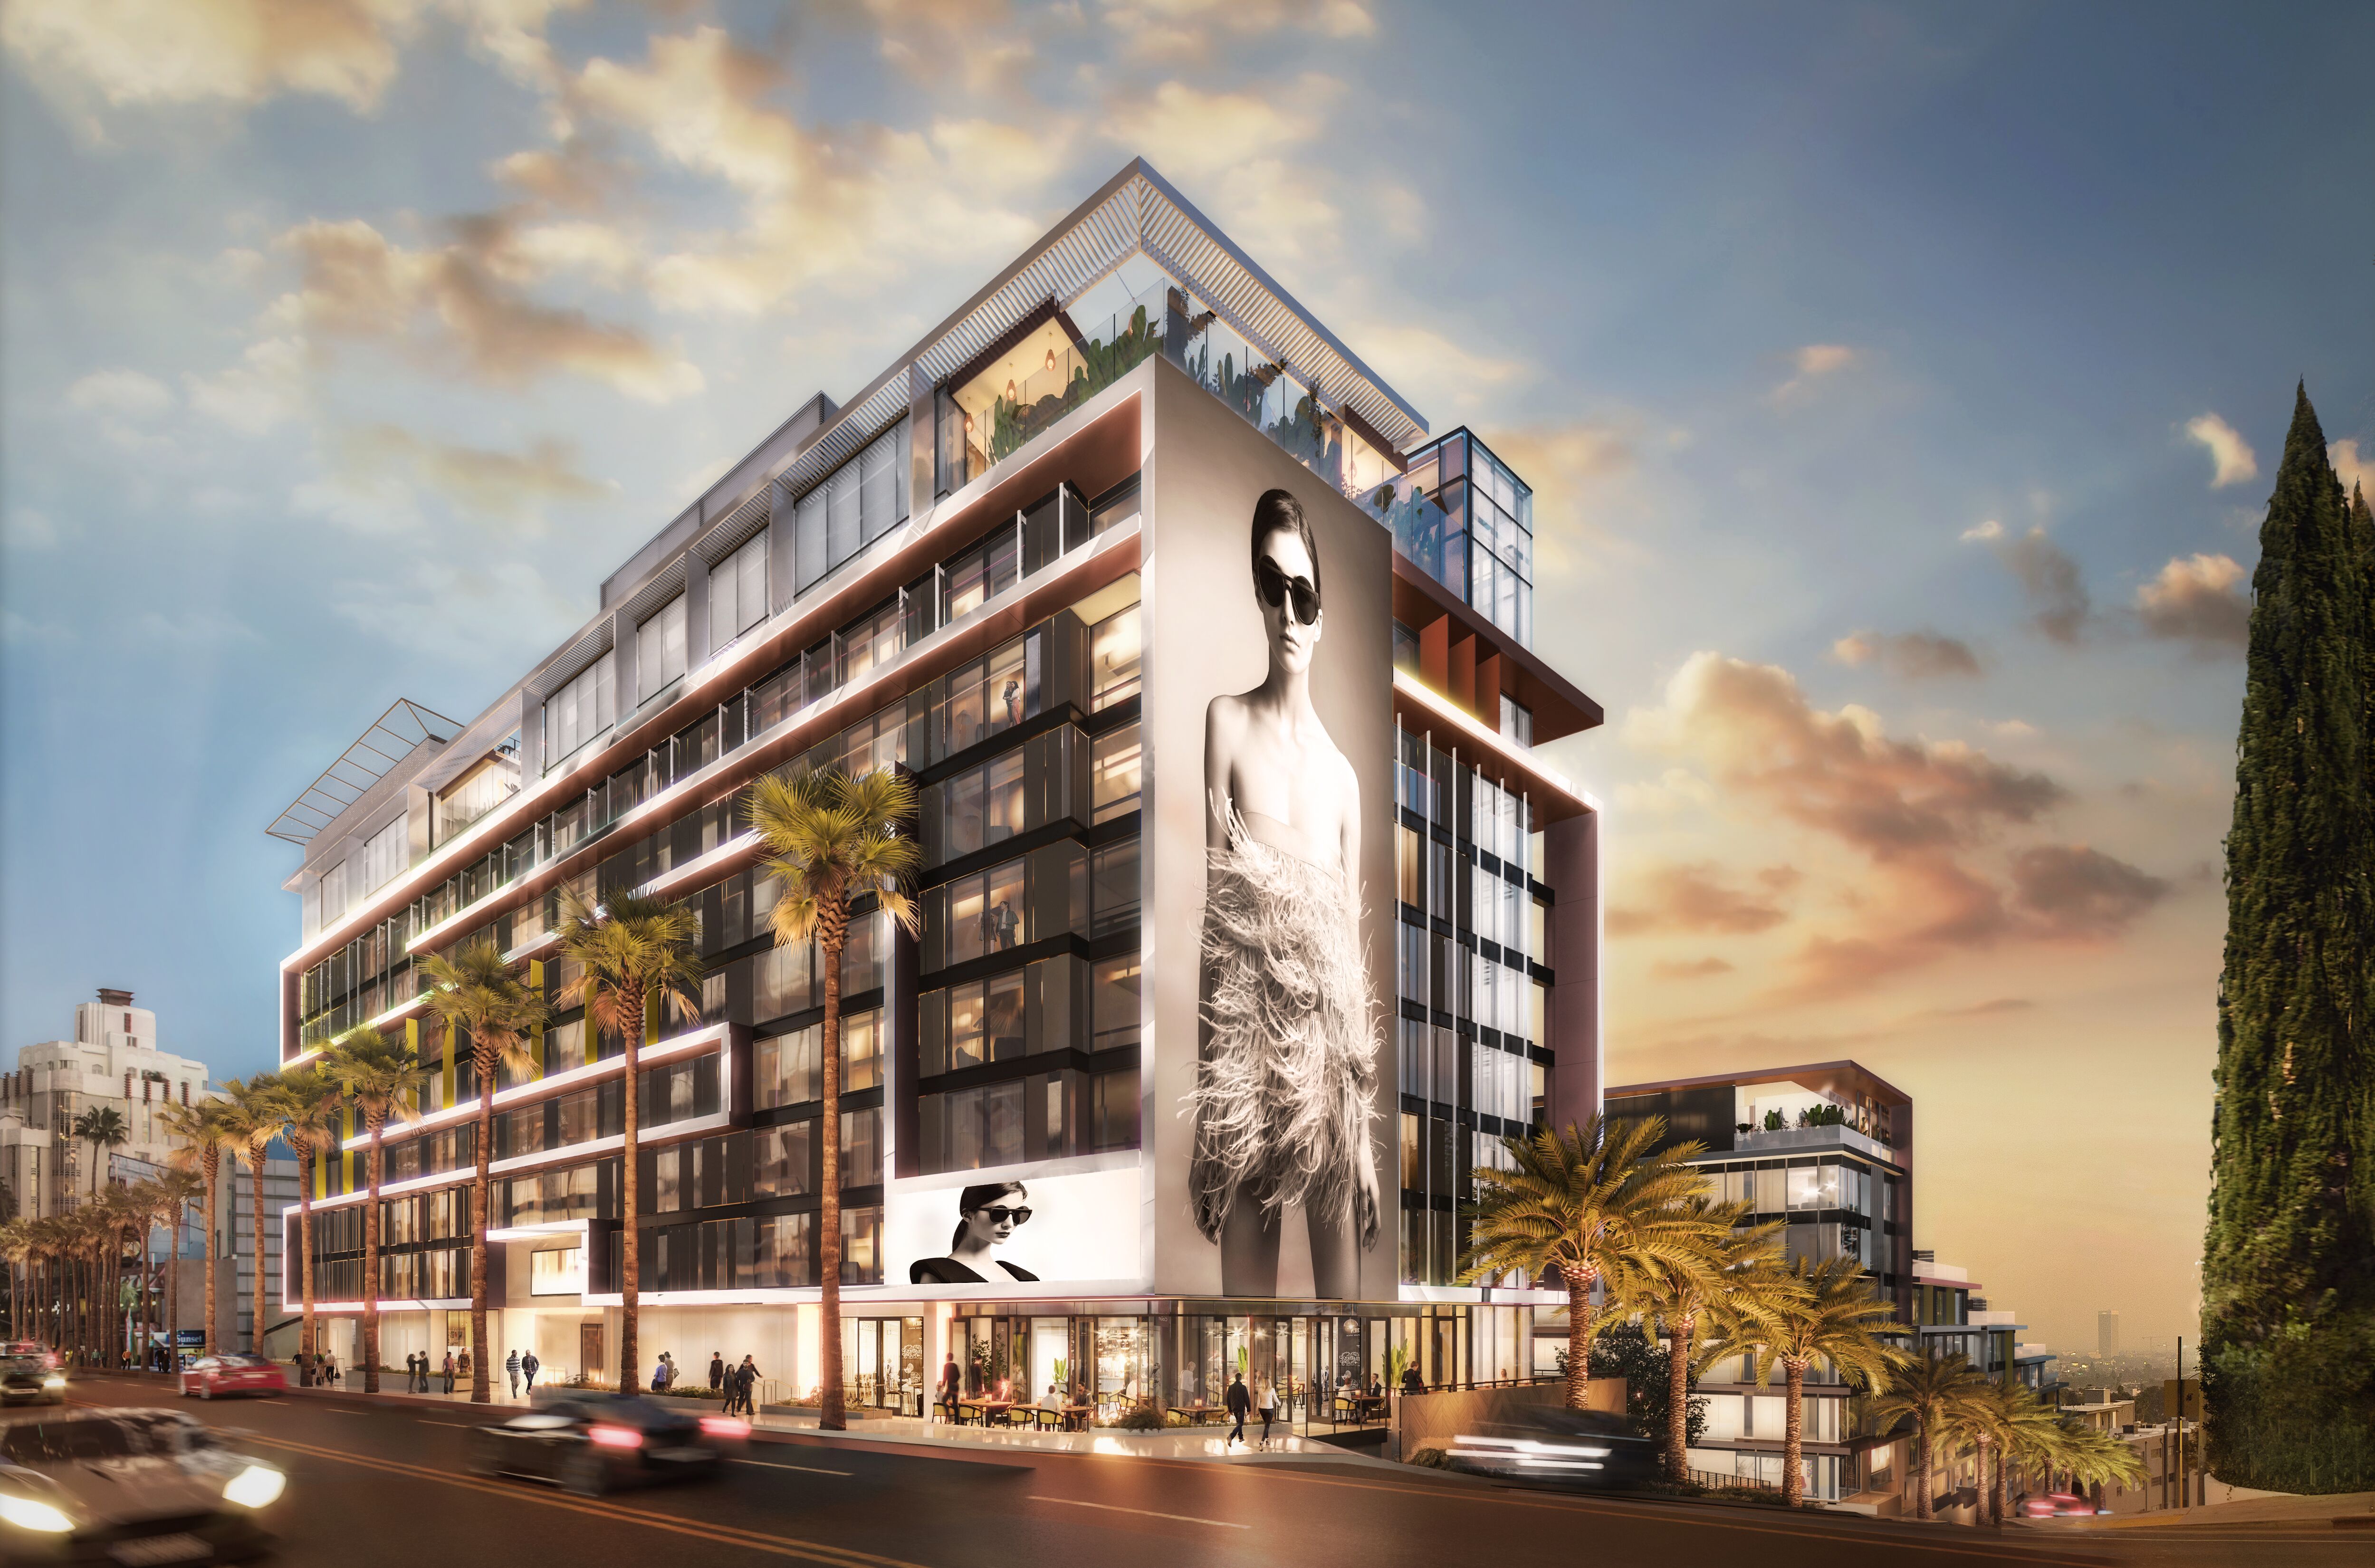 Montage Hotels rolls out luxury residences with its new Pendry hotel on the Sunset Strip